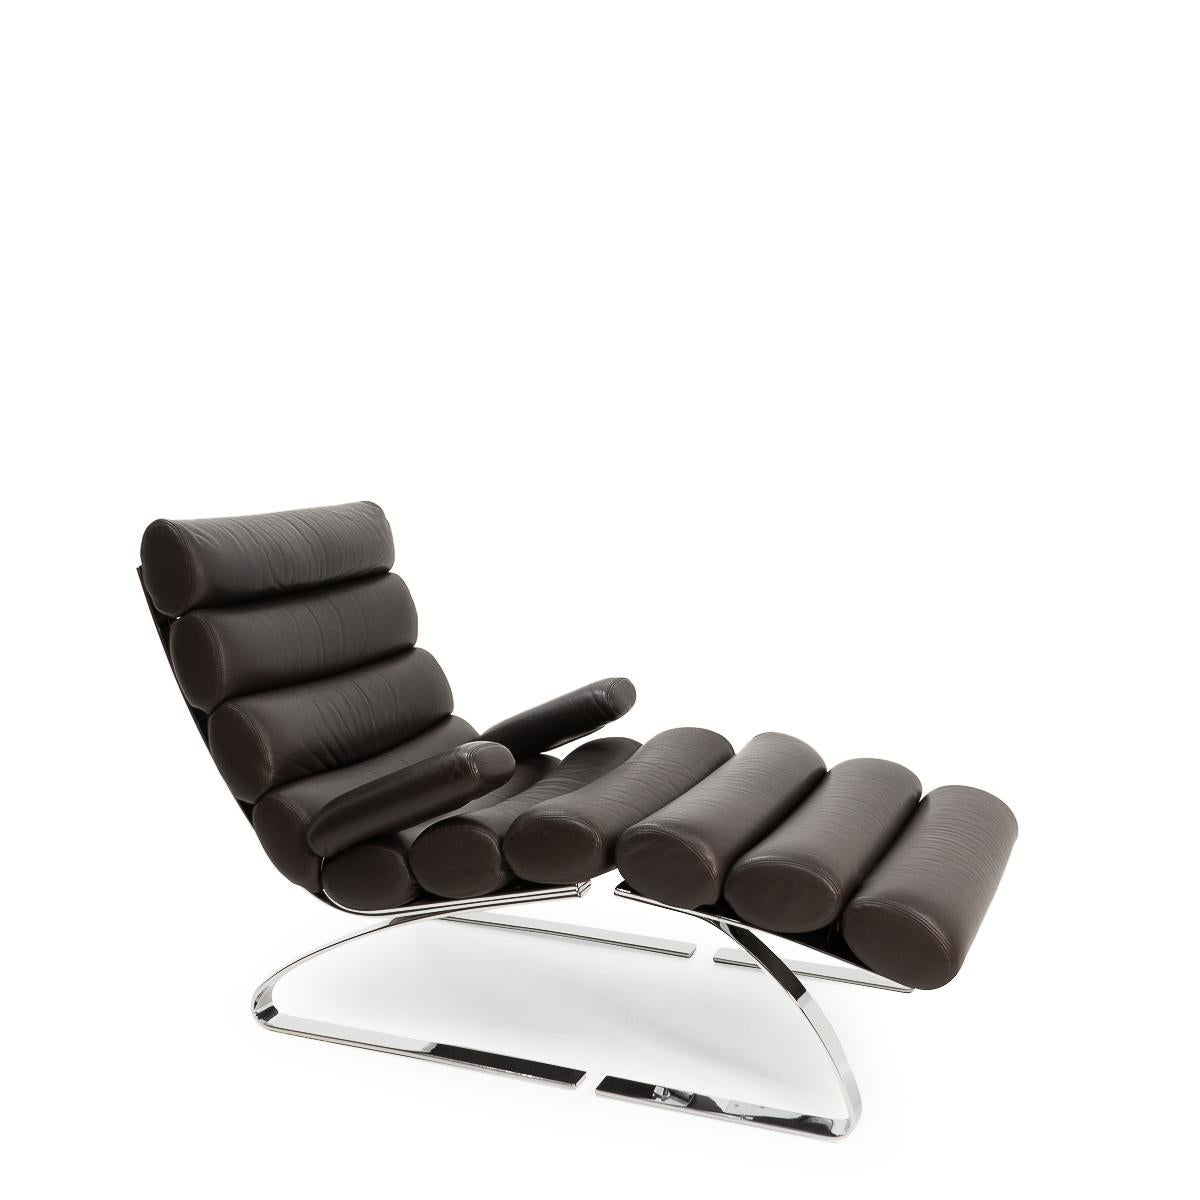 Sinus Lounge chair and ottoman designed by Reinhold Adolf and Hans-Jürgen Schröpfer for COR (Germany) during the 1970s.

Both lounge chair and ottoman feature a heavy chromed steel cantilevered frame, with a dark brown leather upholstered set of